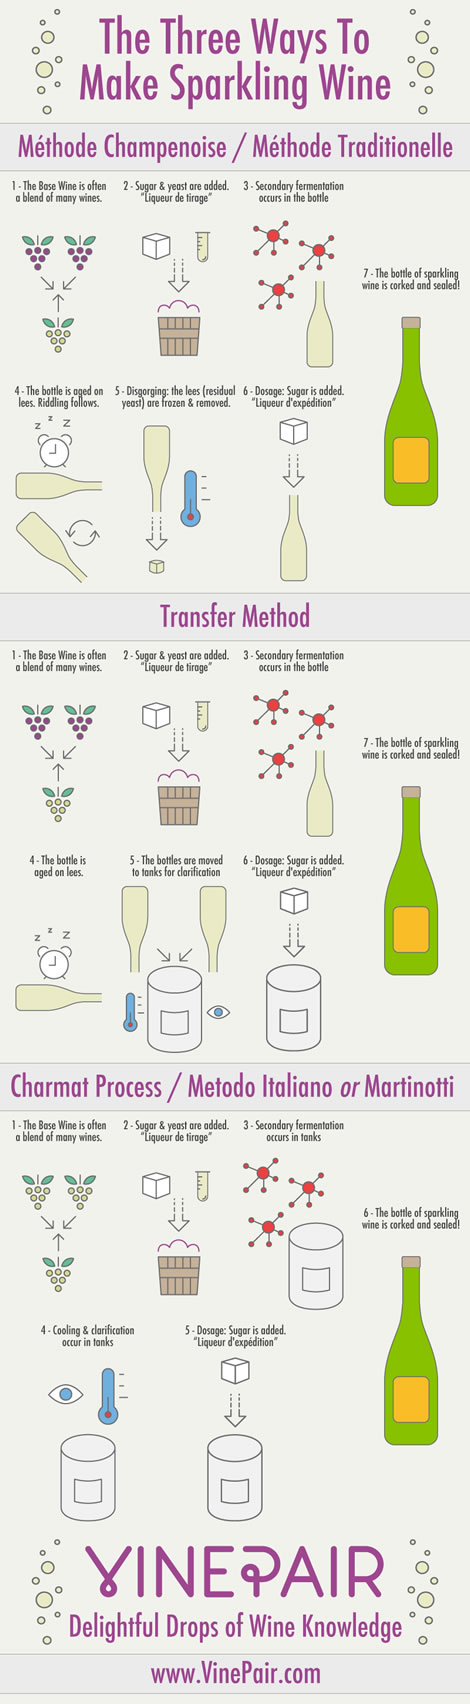 how-to-make-sparkling-wine-infographic